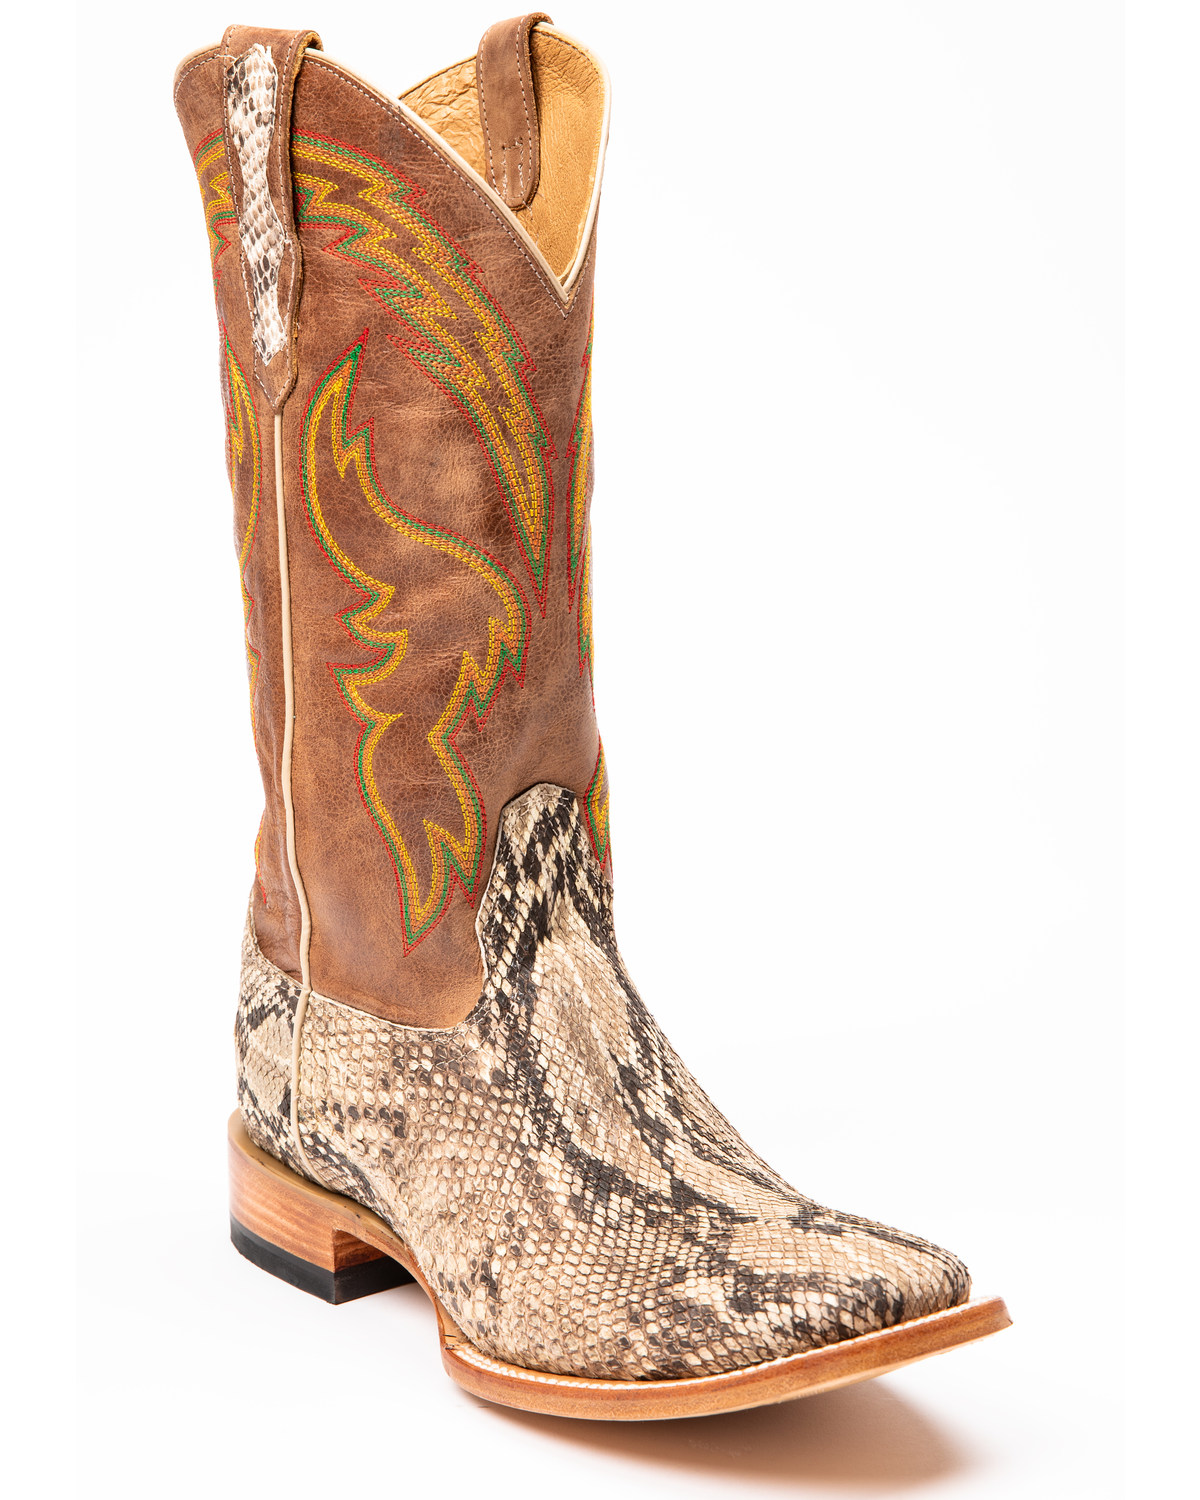 Men/'s Wild West Python Wide Square Toe Boots Handcrafted